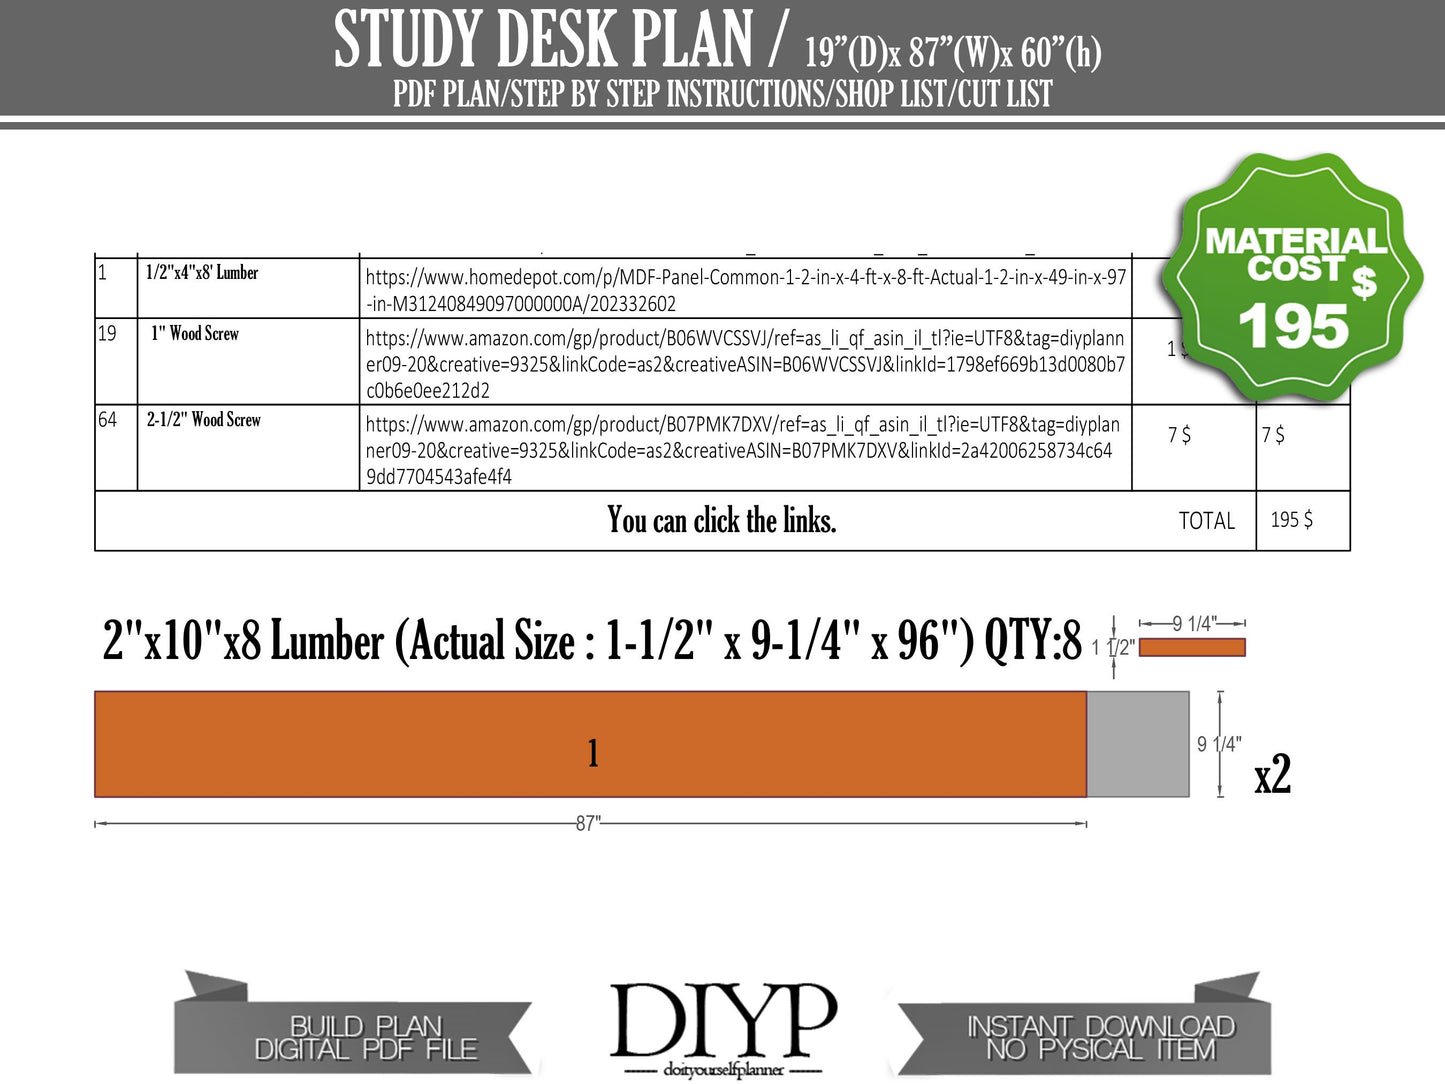 Diy build PDF plan for wooden study table - Build your own affordable Study Desk